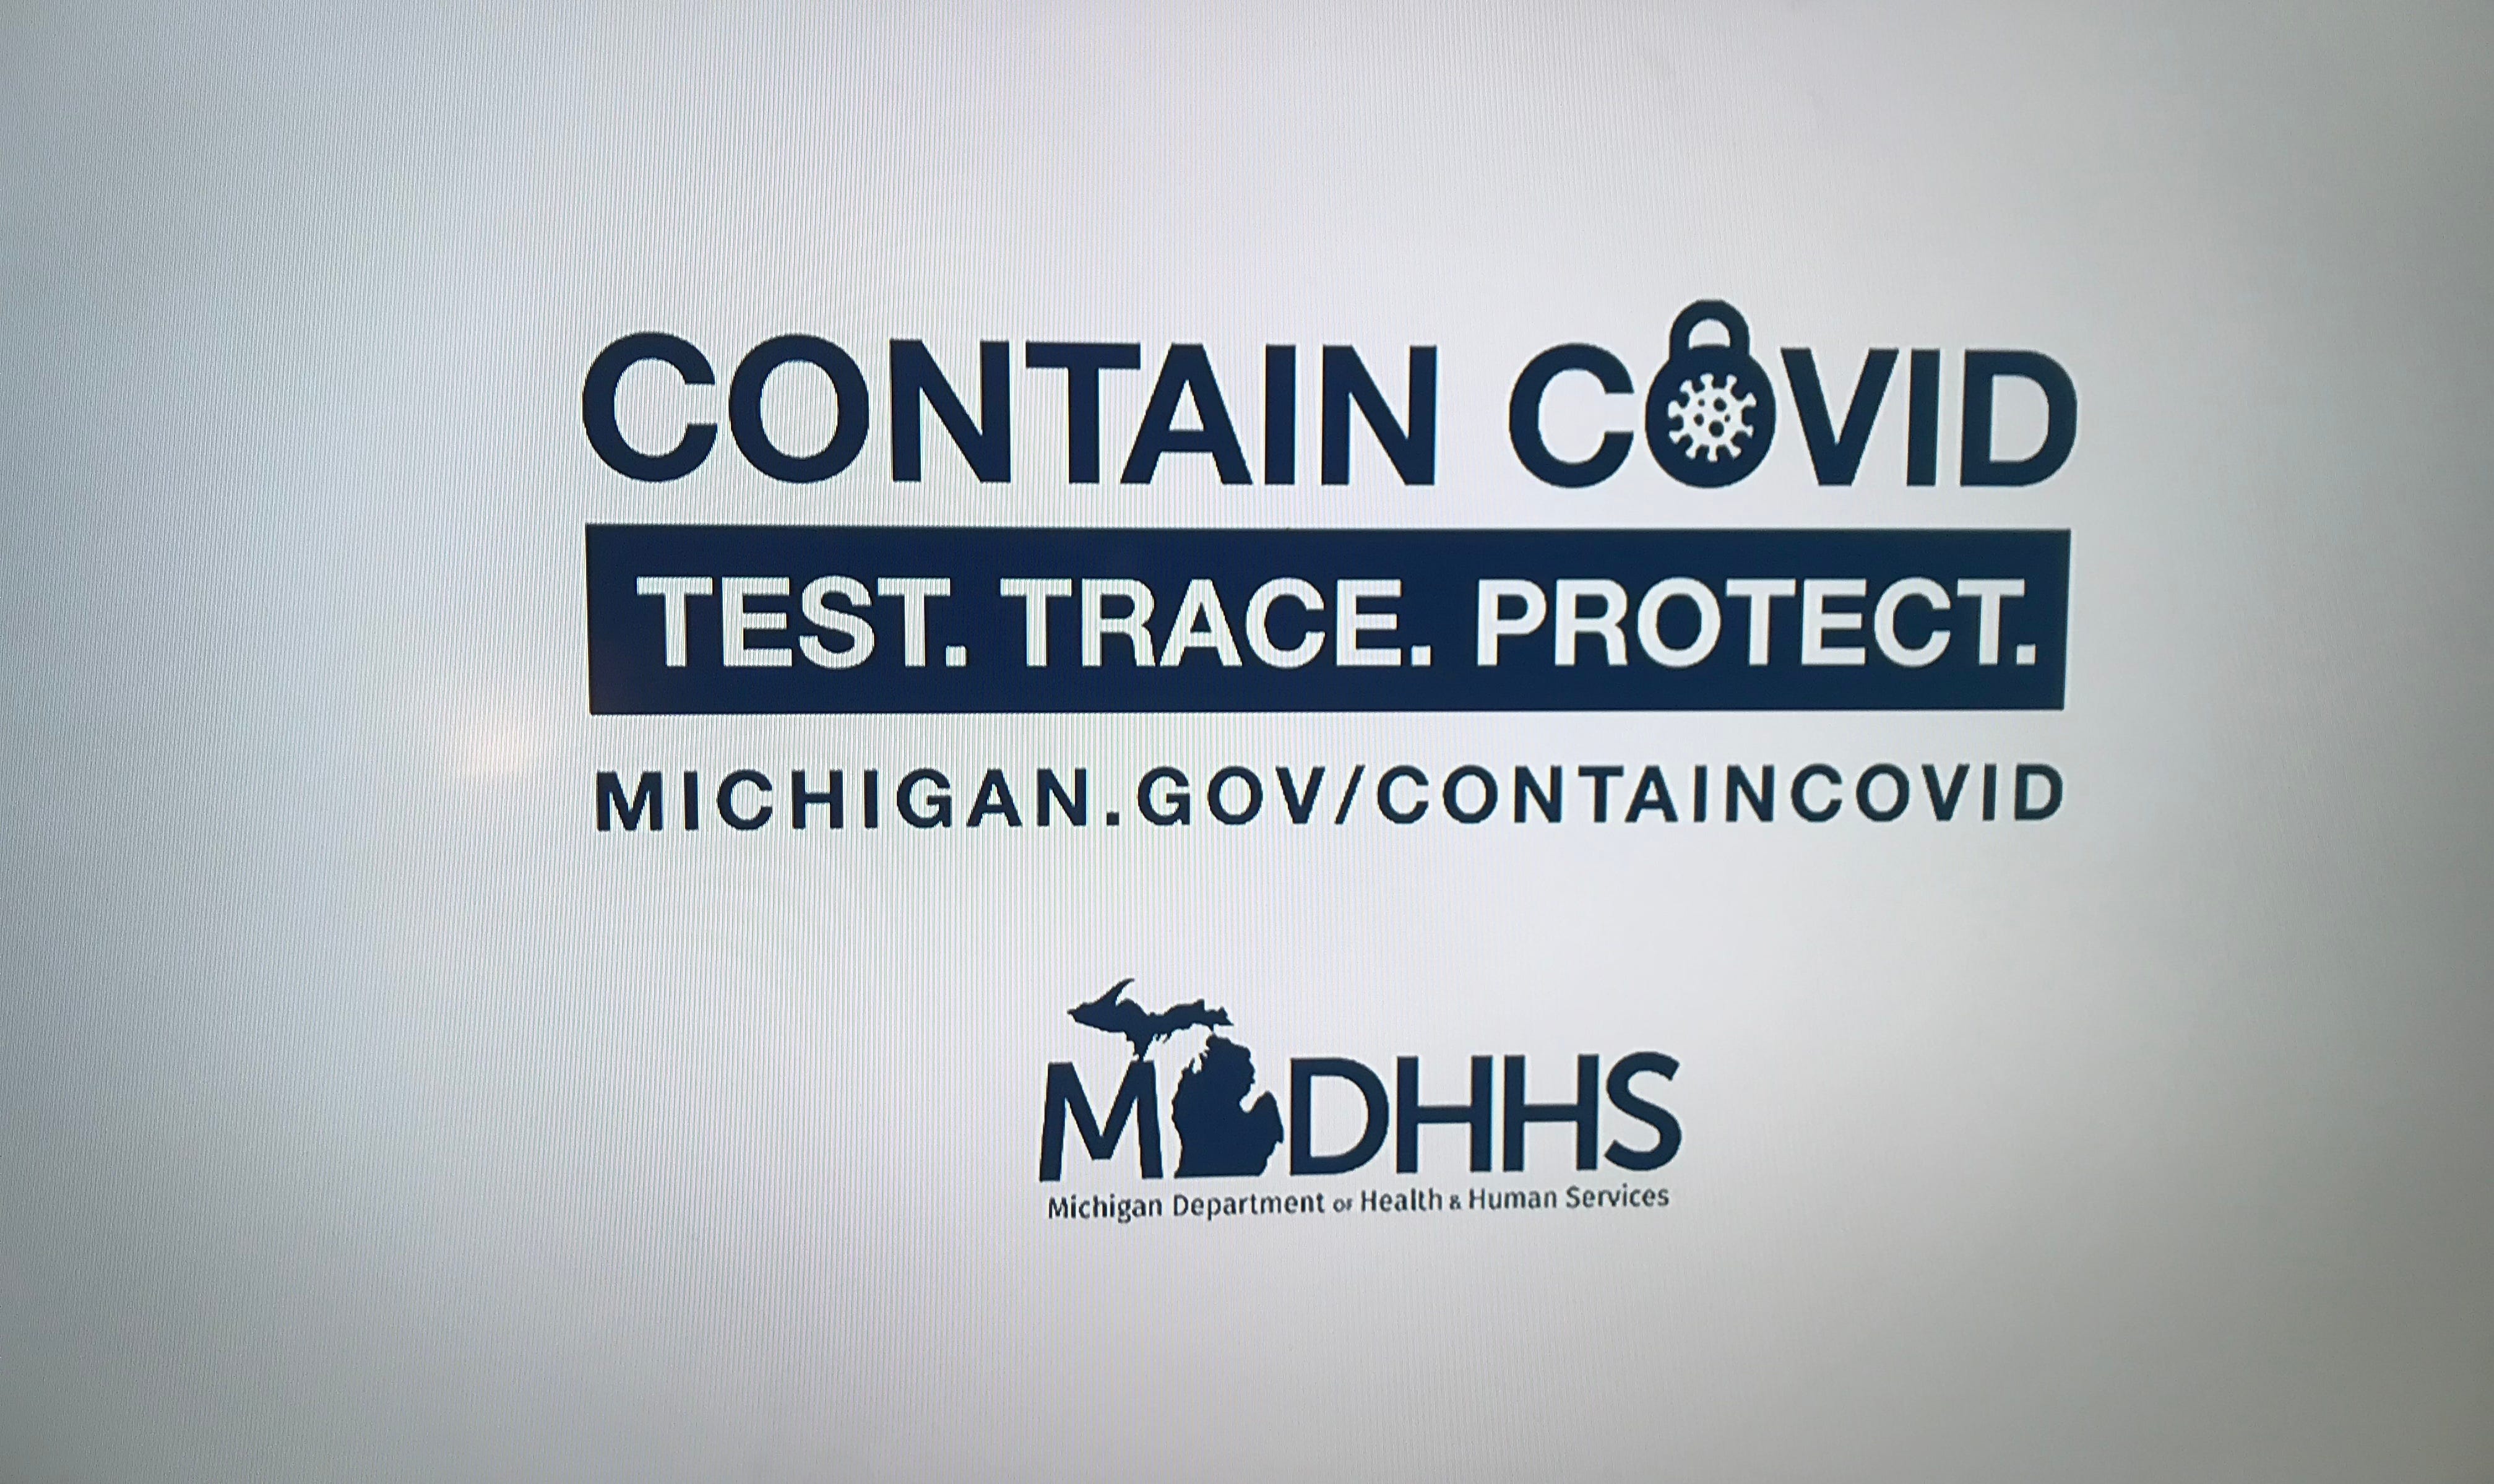 A television advertisement informs viewers about Michigan's contact-tracing program for trying to stem the spread of COVID-19.